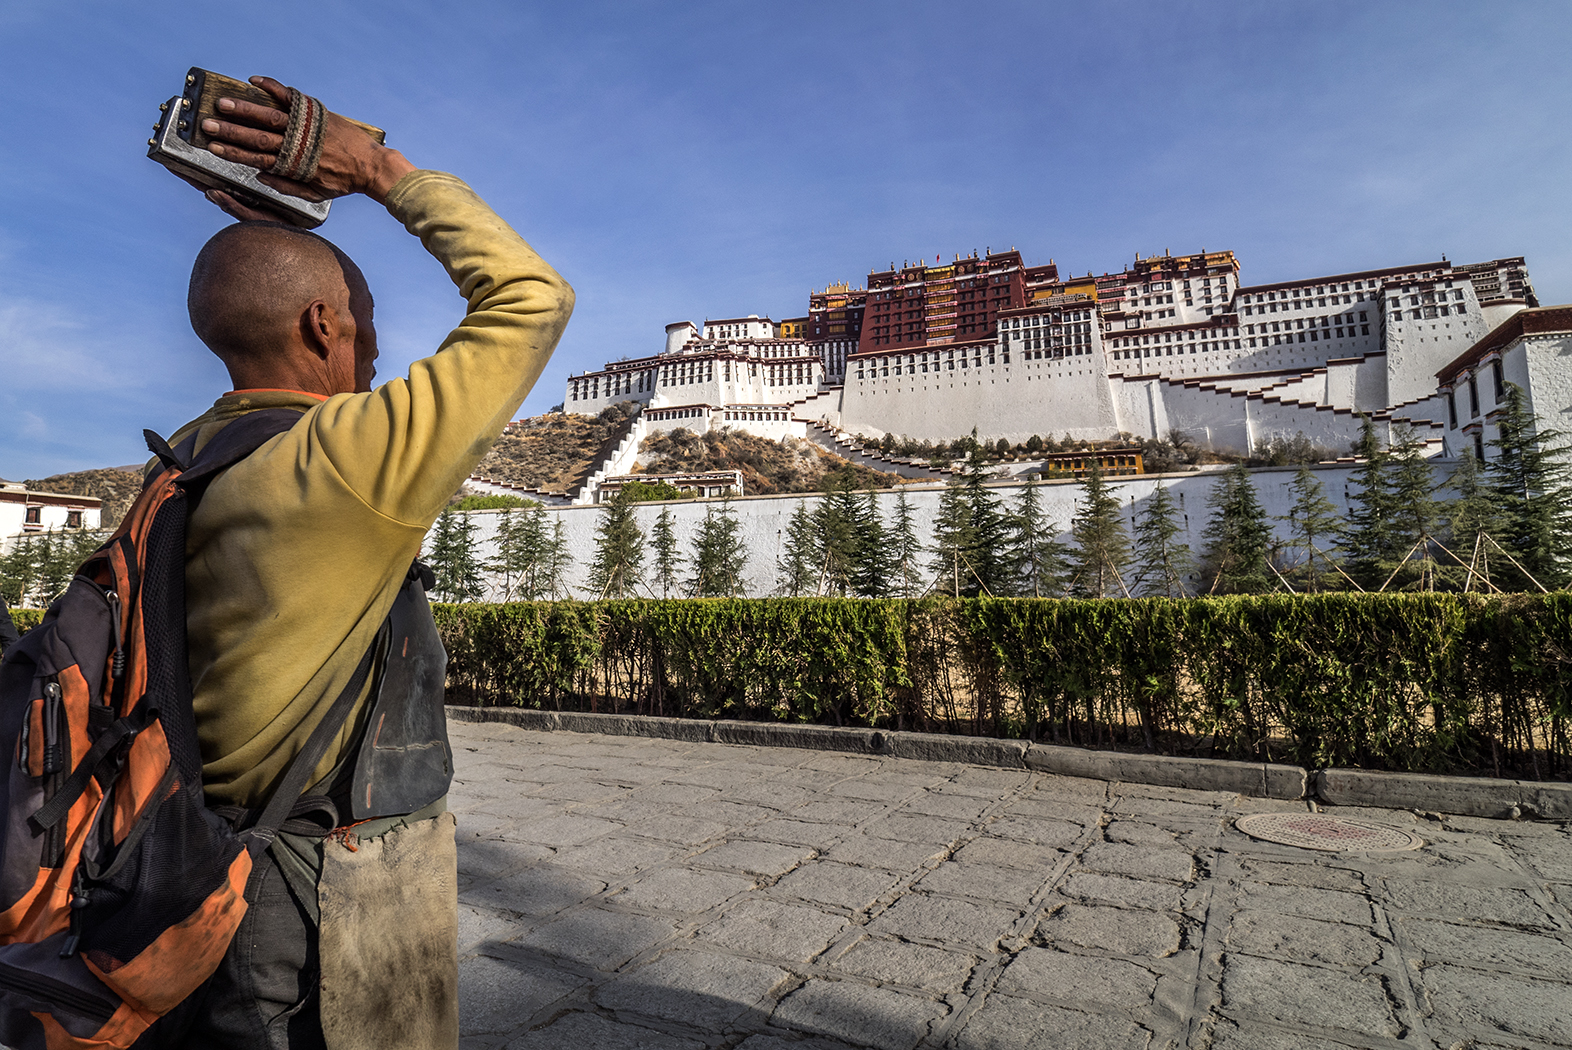 Lhasa, Tibet, a pilgrim honors Poltala Palace by prostrating himself a couple of hundred times in front of the sacred building.